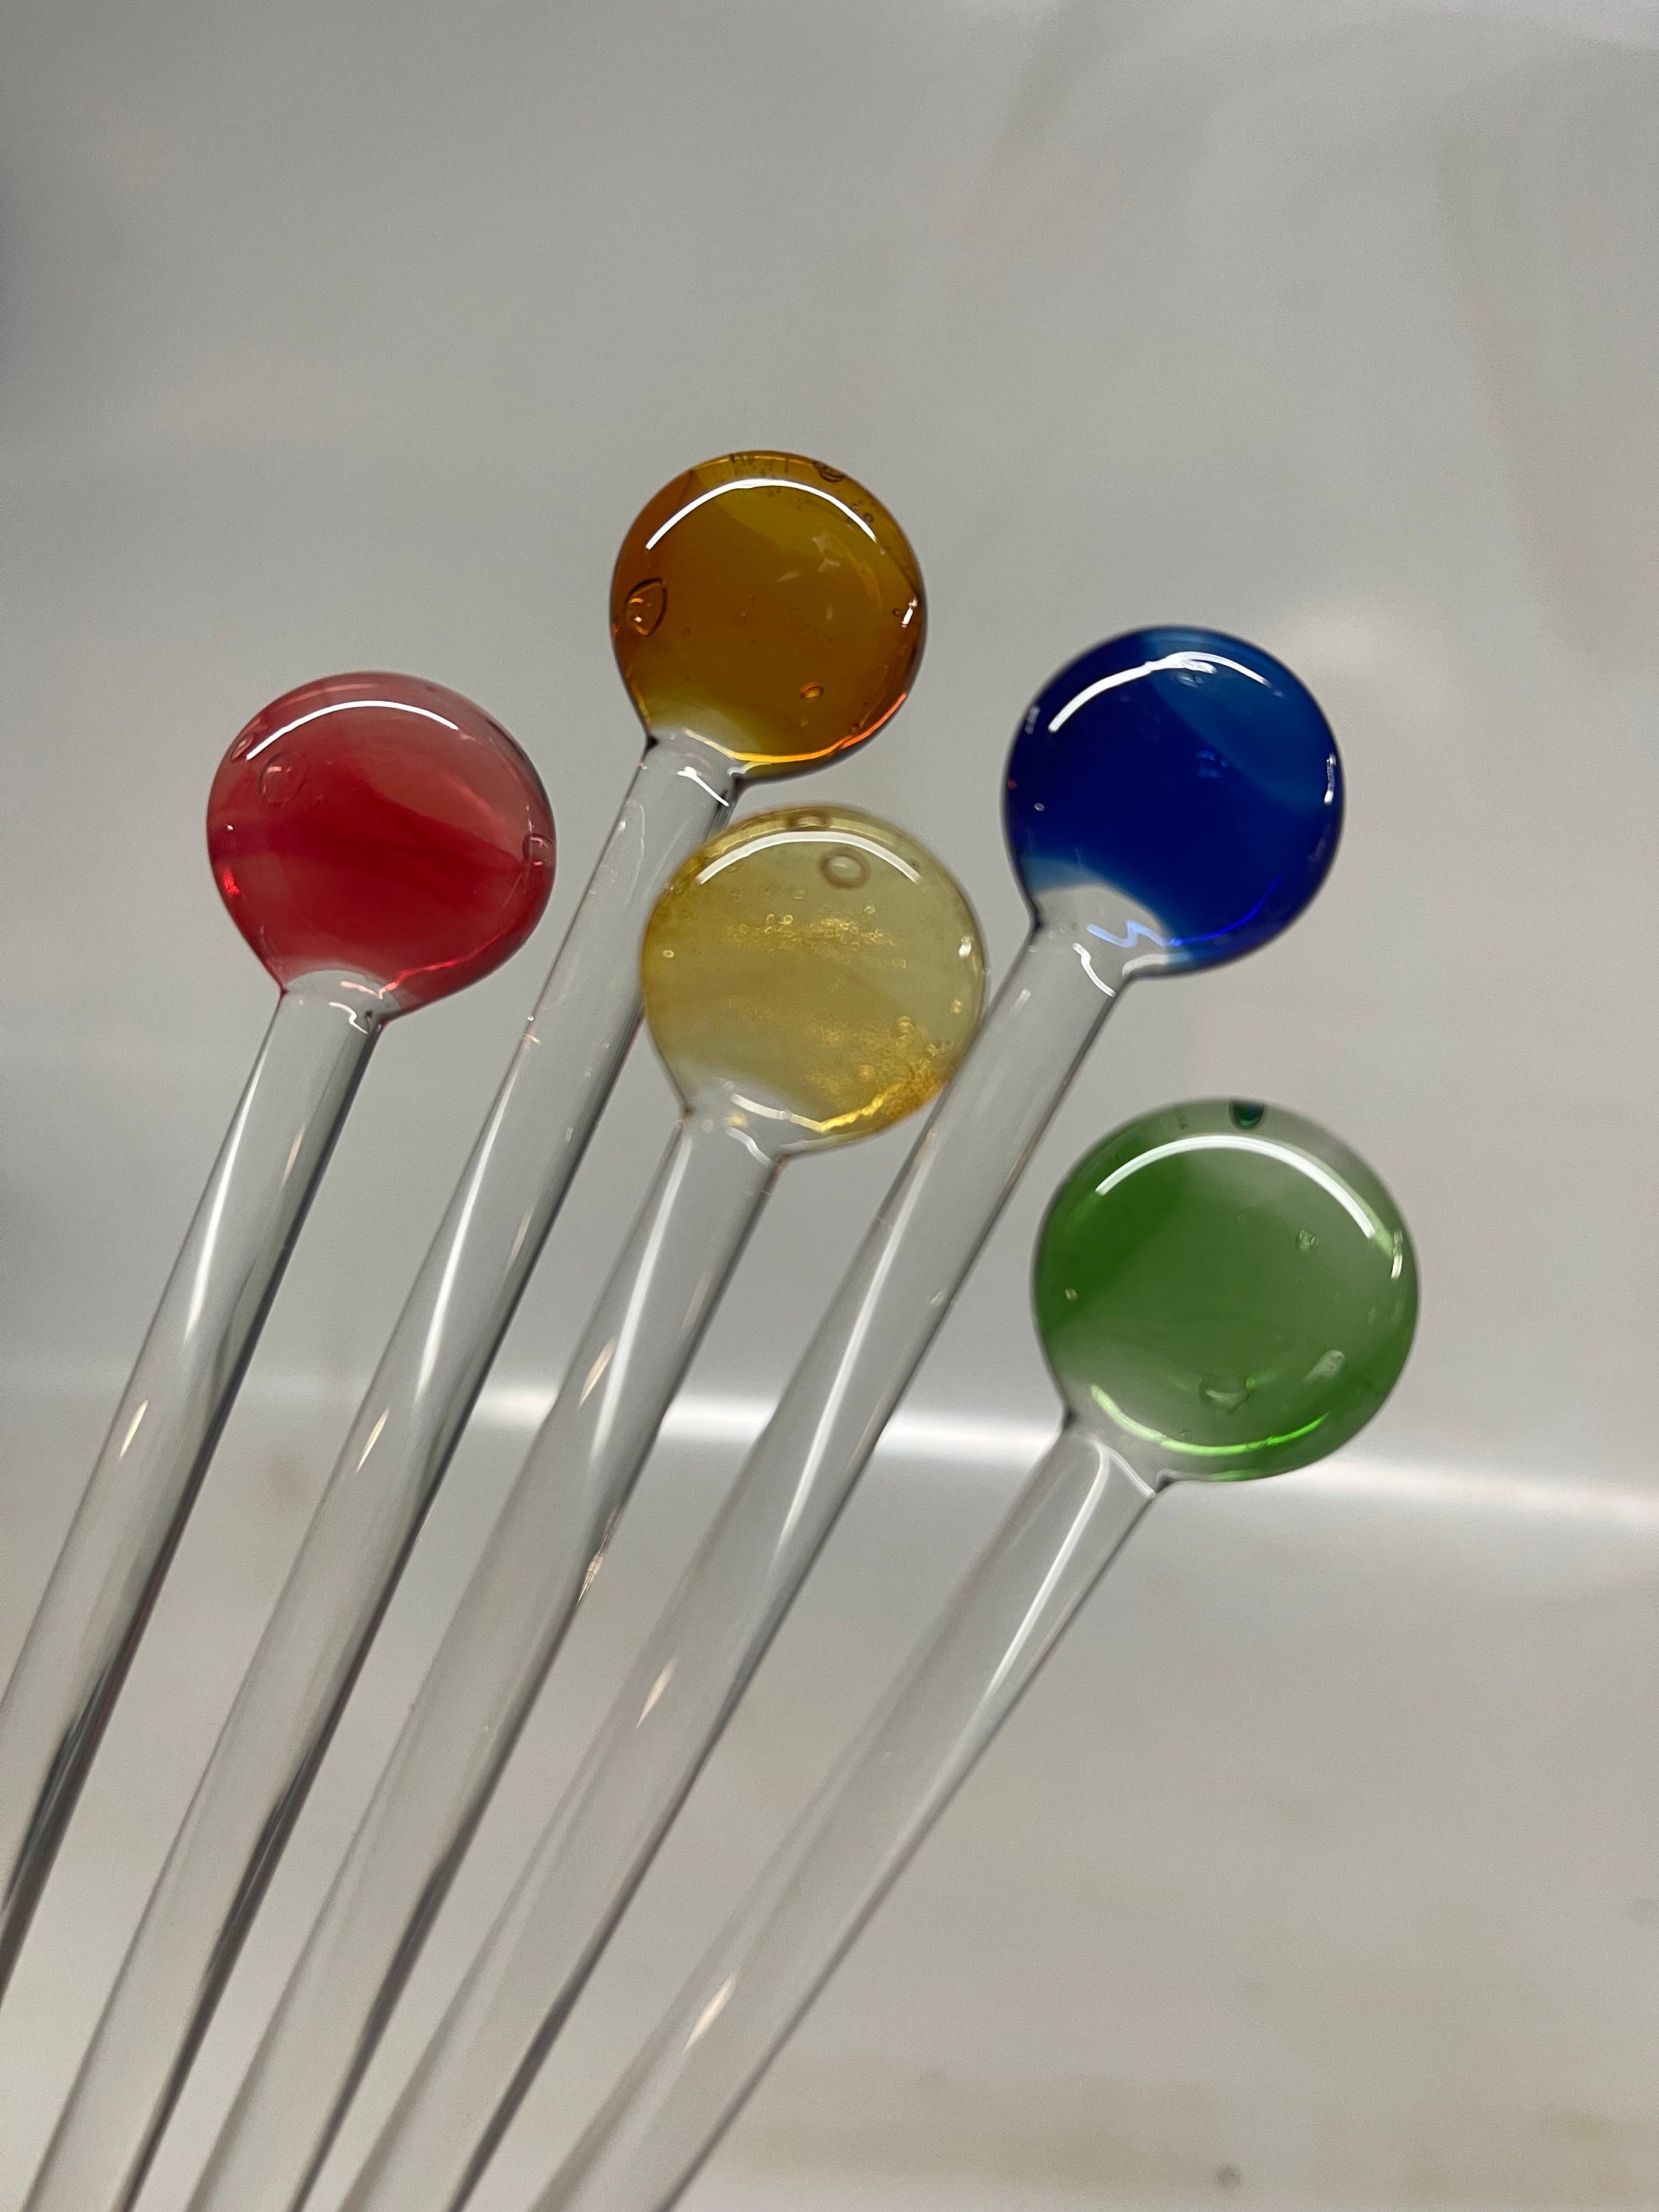 These lollypops sticks are finally made of paper! : r/ZeroWaste